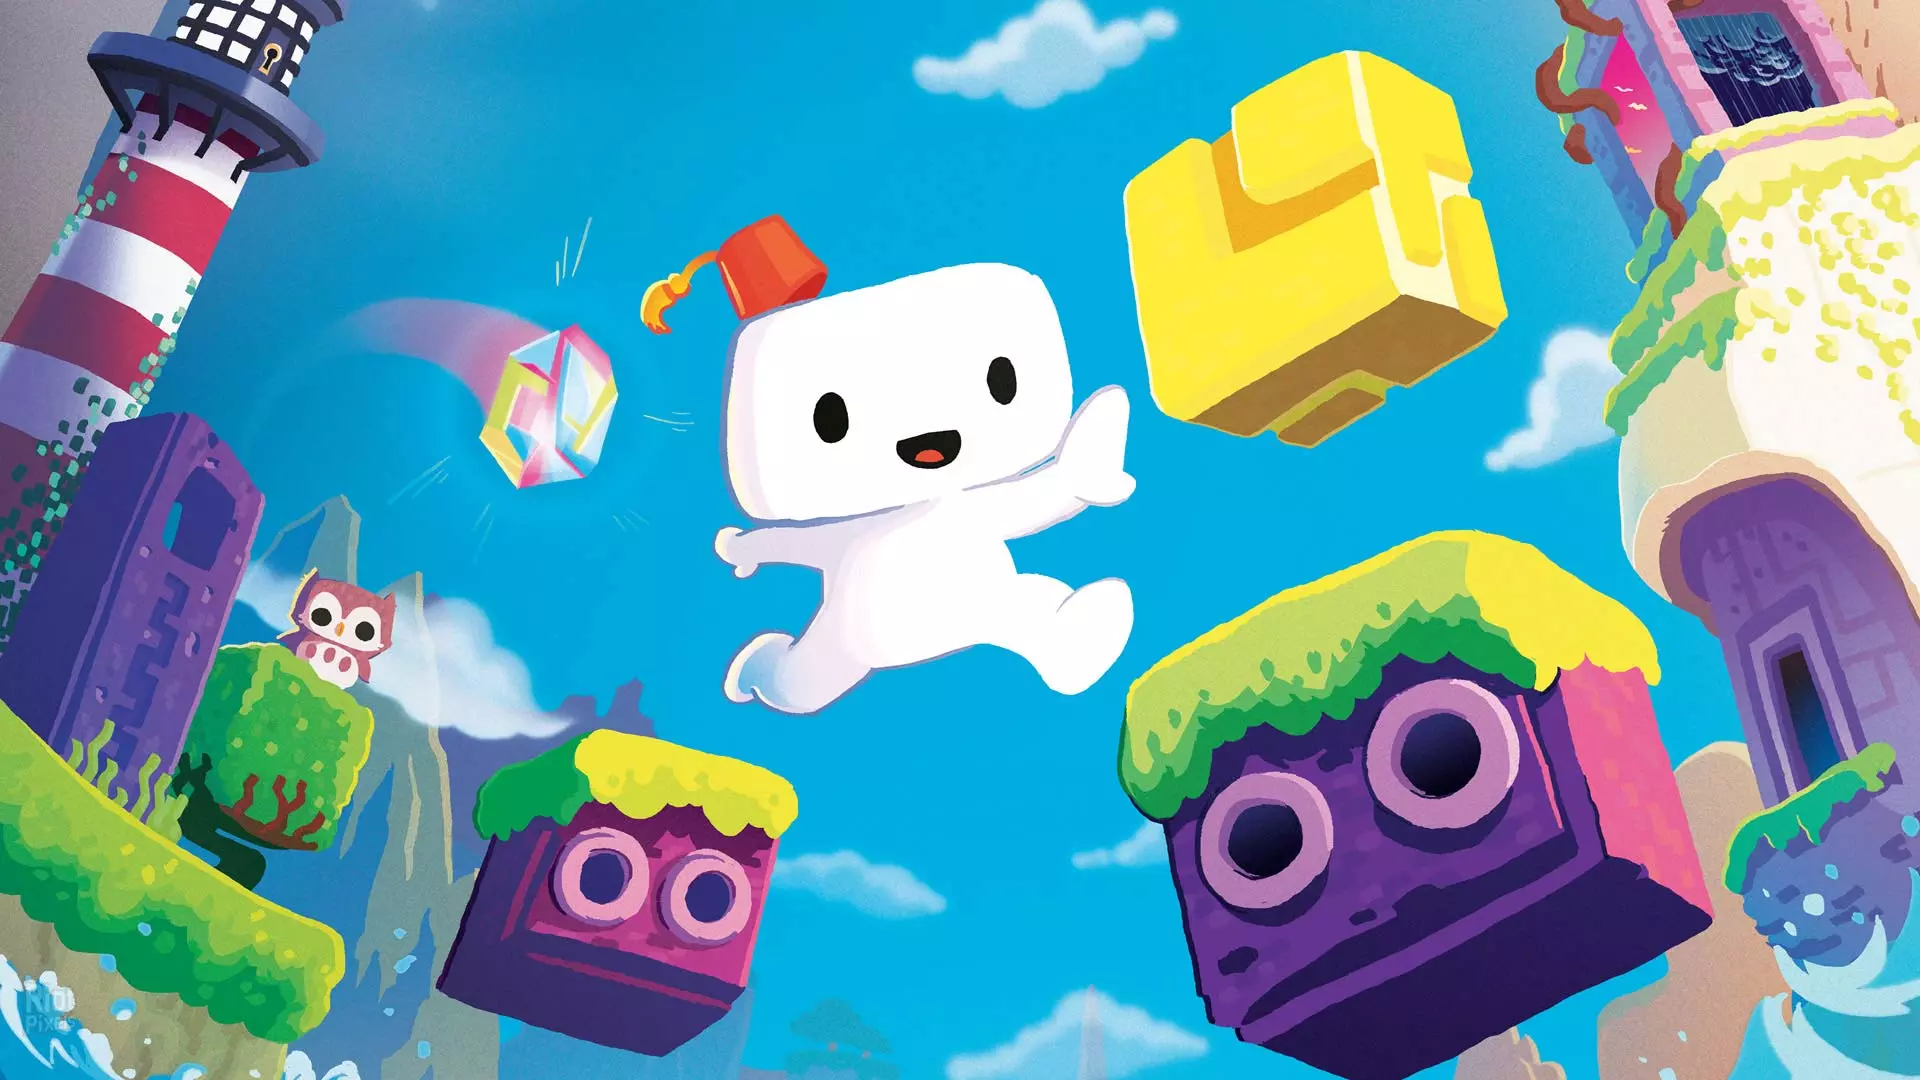 Colorful world and characters of the game Fez